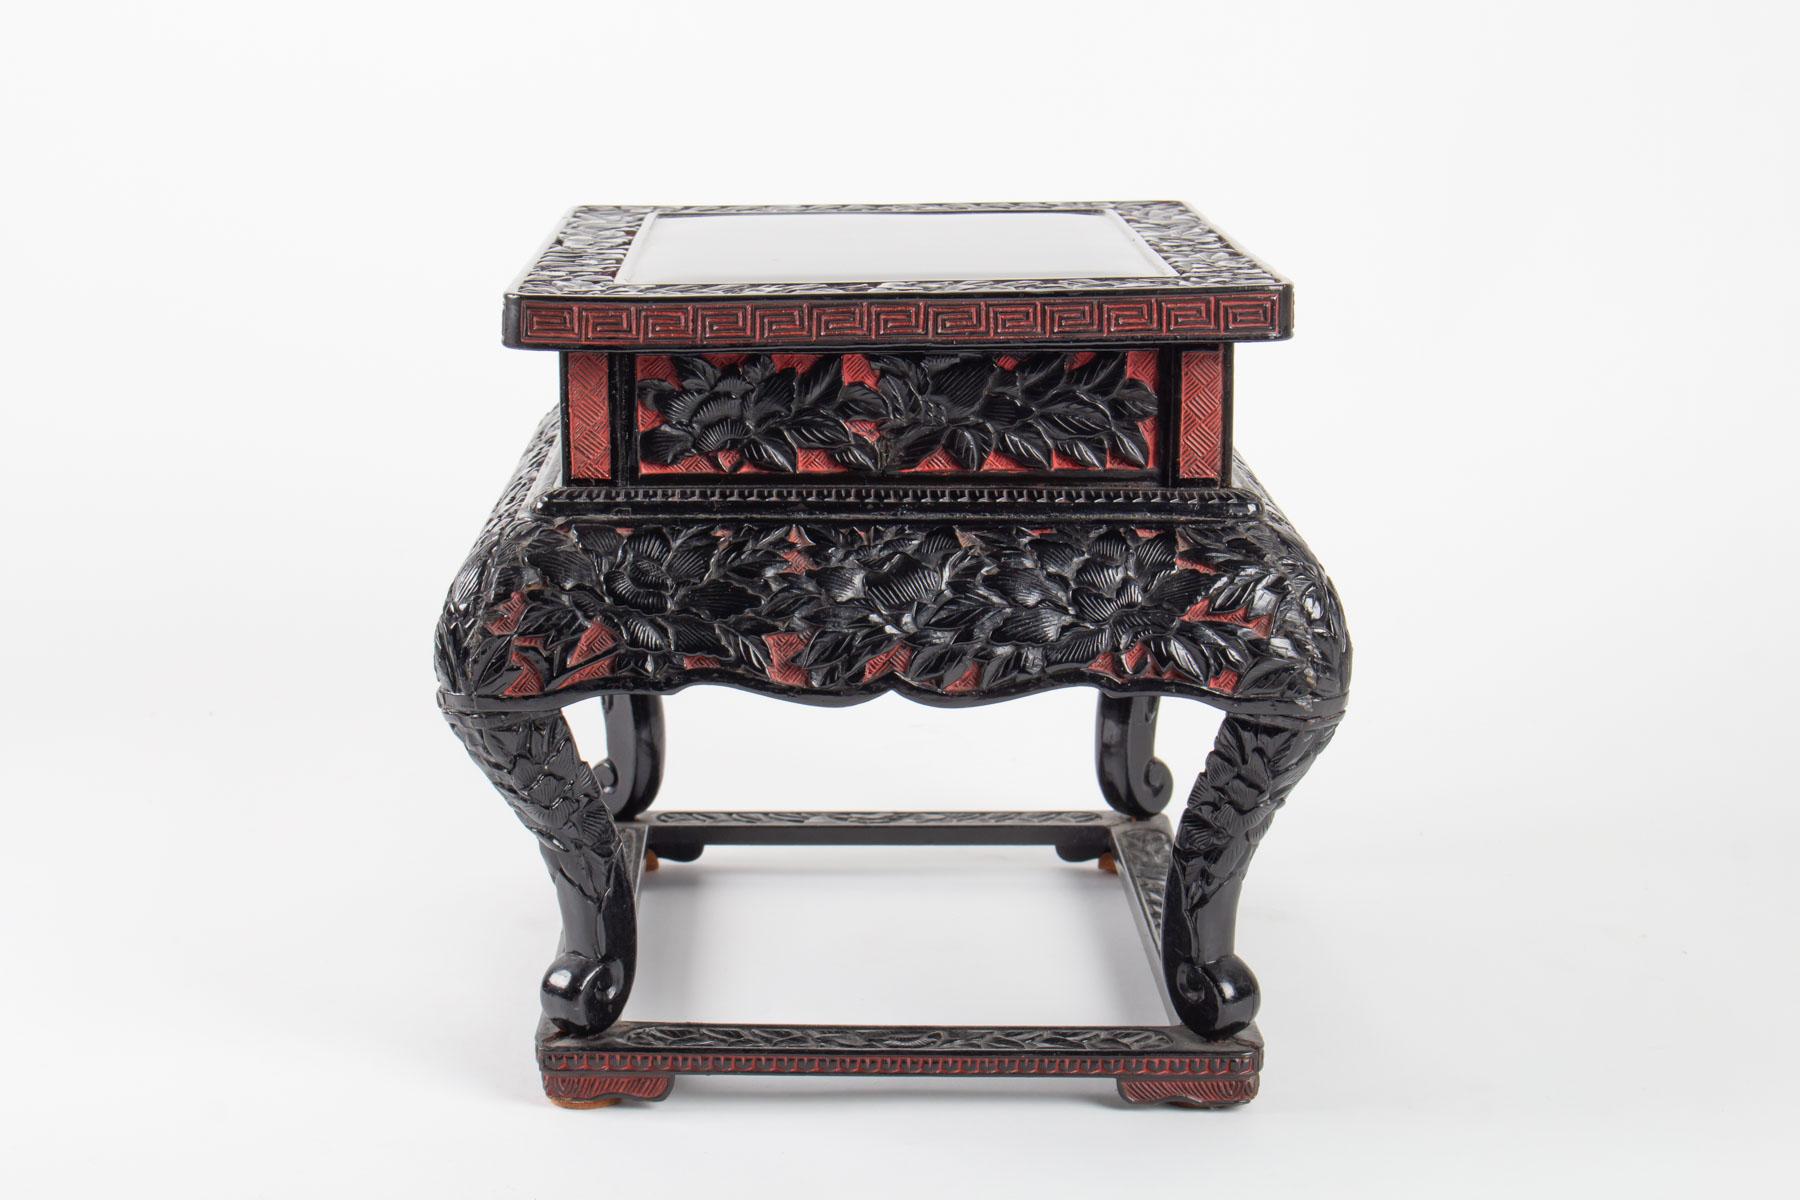 Lacquered Small Table Lacquer Bicolour Chiselled Decor Peonies, China, 19th Century